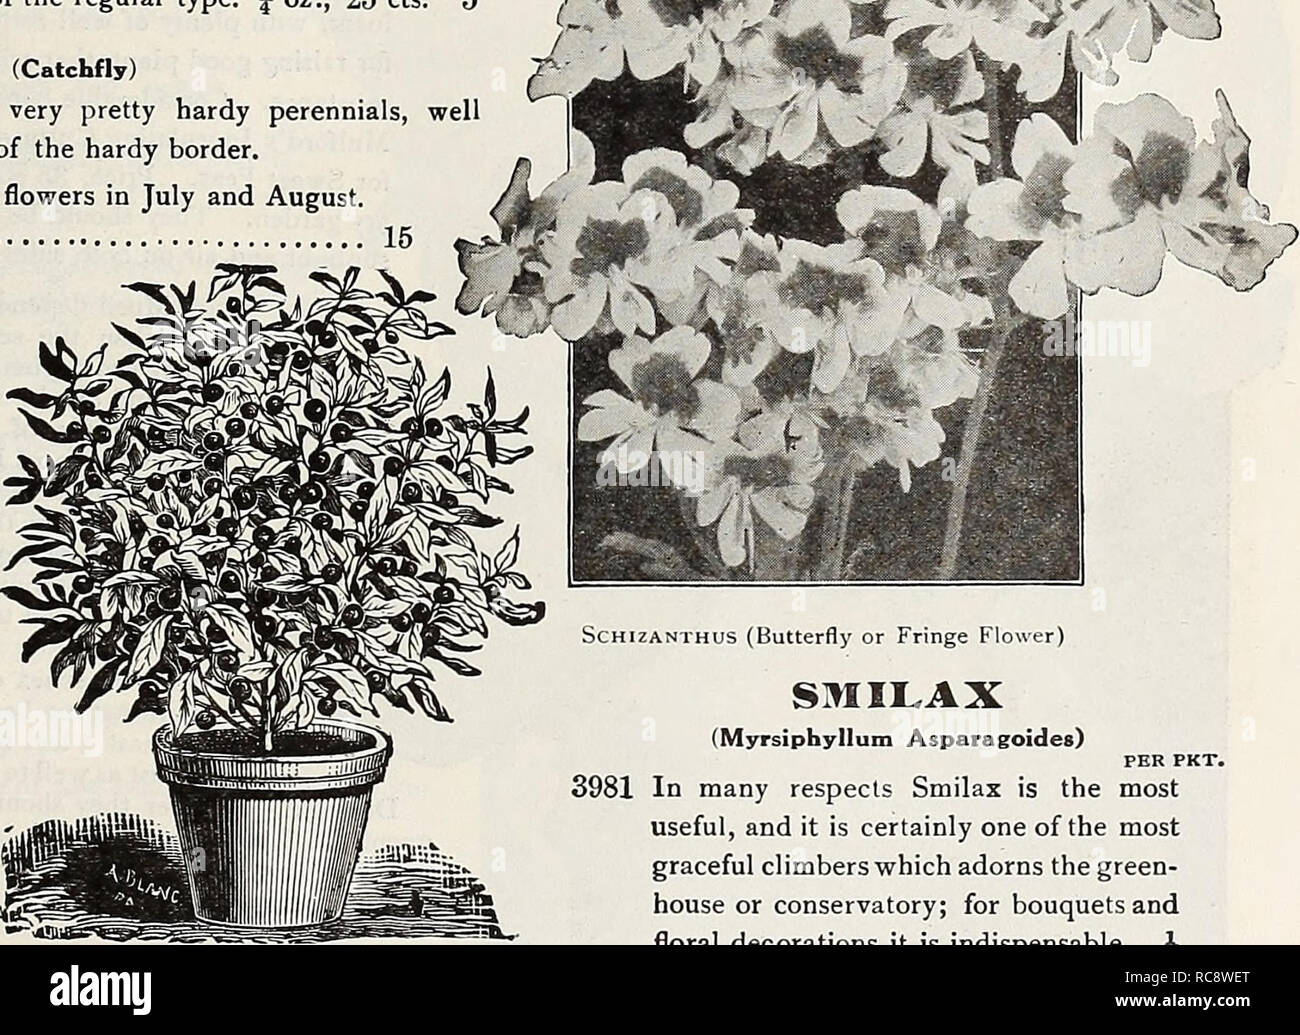 . Dreer's garden book 1921. Seeds Catalogs; Nursery stock Catalogs; Gardening Equipment and supplies Catalogs; Flowers Seeds Catalogs; Vegetables Seeds Catalogs; Fruit Seeds Catalogs. m'ji^^*rM. SILENE (Catchfly) The varieties offered below are very pretty hardy perennials, well adapted for the rockery or the front of the hardy border. 3977 Alpestris. Glistening white flowers in July and August. 4 in 3978 Schafta {Autumn Catchfly). A charming border or rock plant, grow- ing from 4 to 6 inches high, with masses of bright pink flowers from July to October 15 Straw^ Flo livers or Everlastings Thi Stock Photo